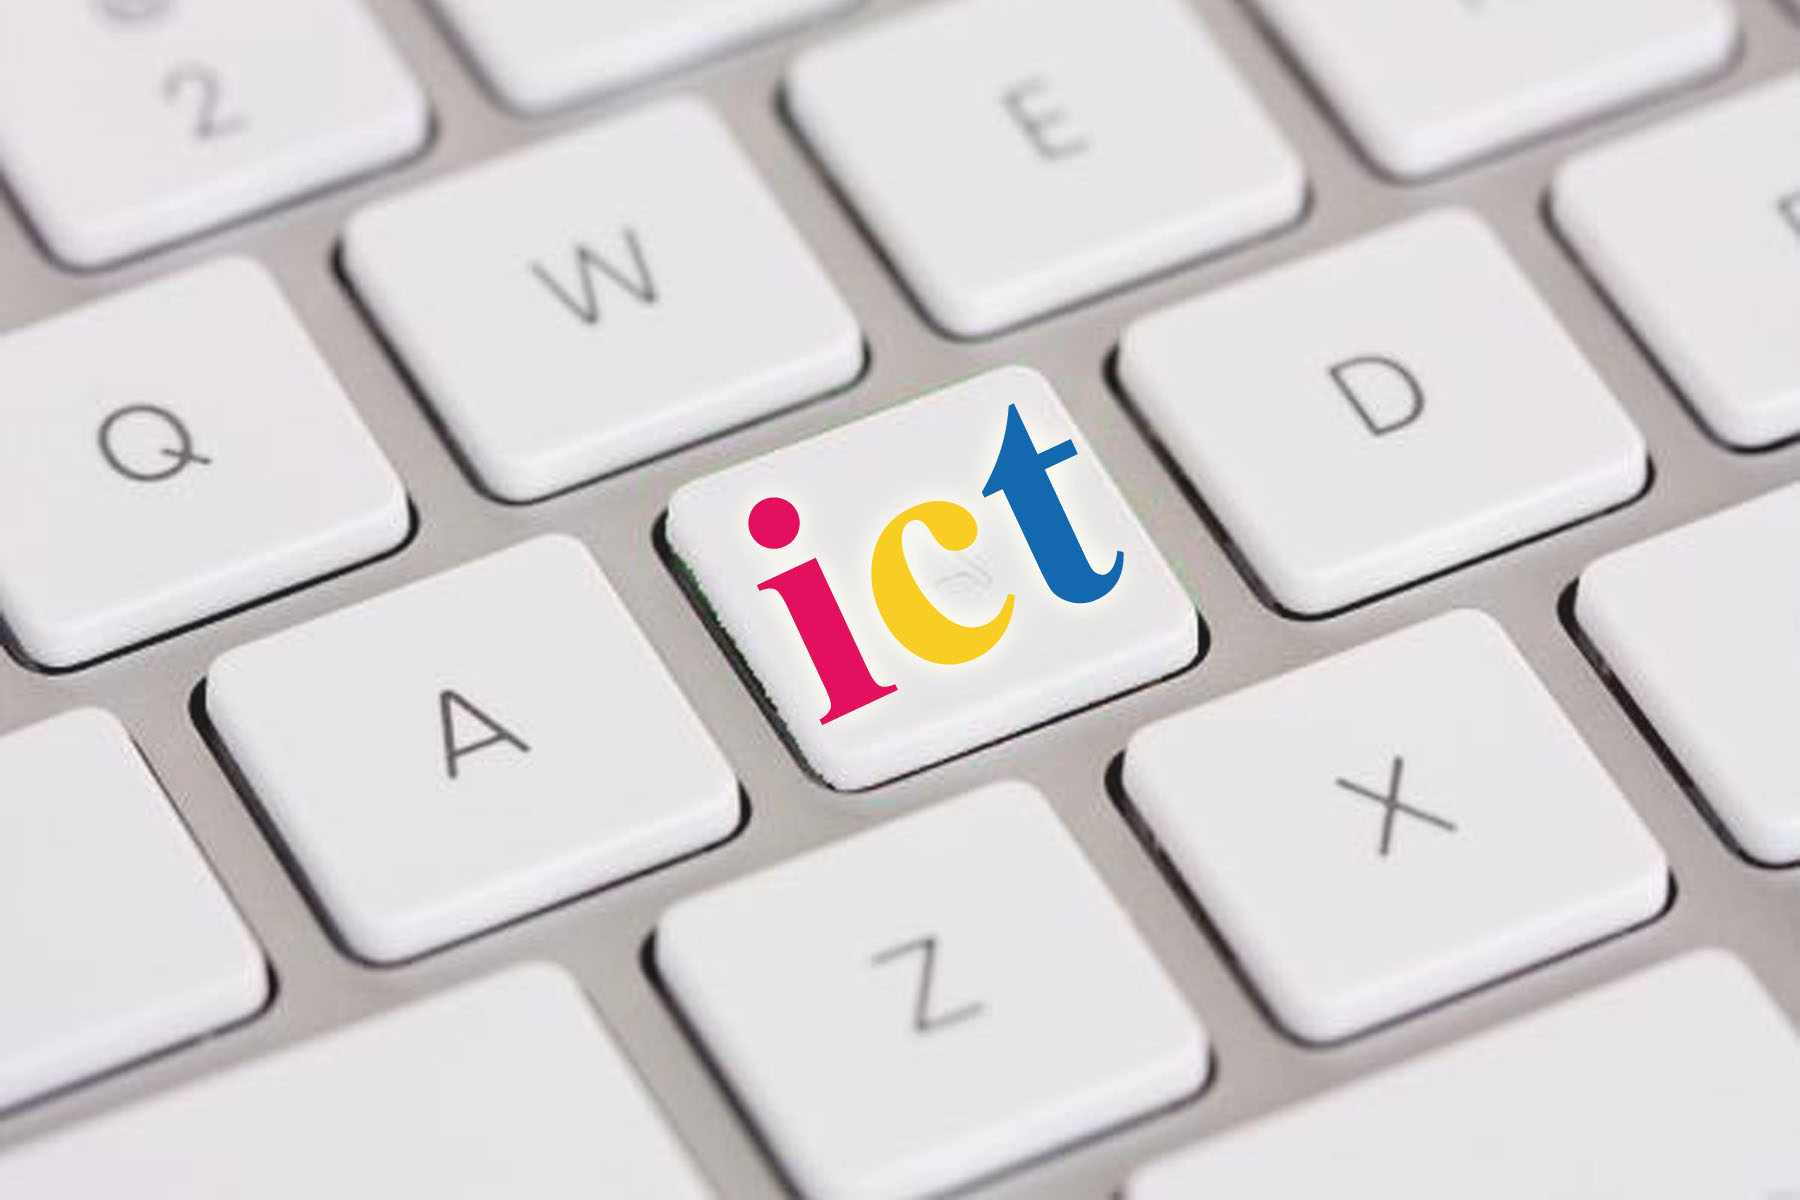 ict-for accessibility - 9th European Forum on Accessibility - Paris